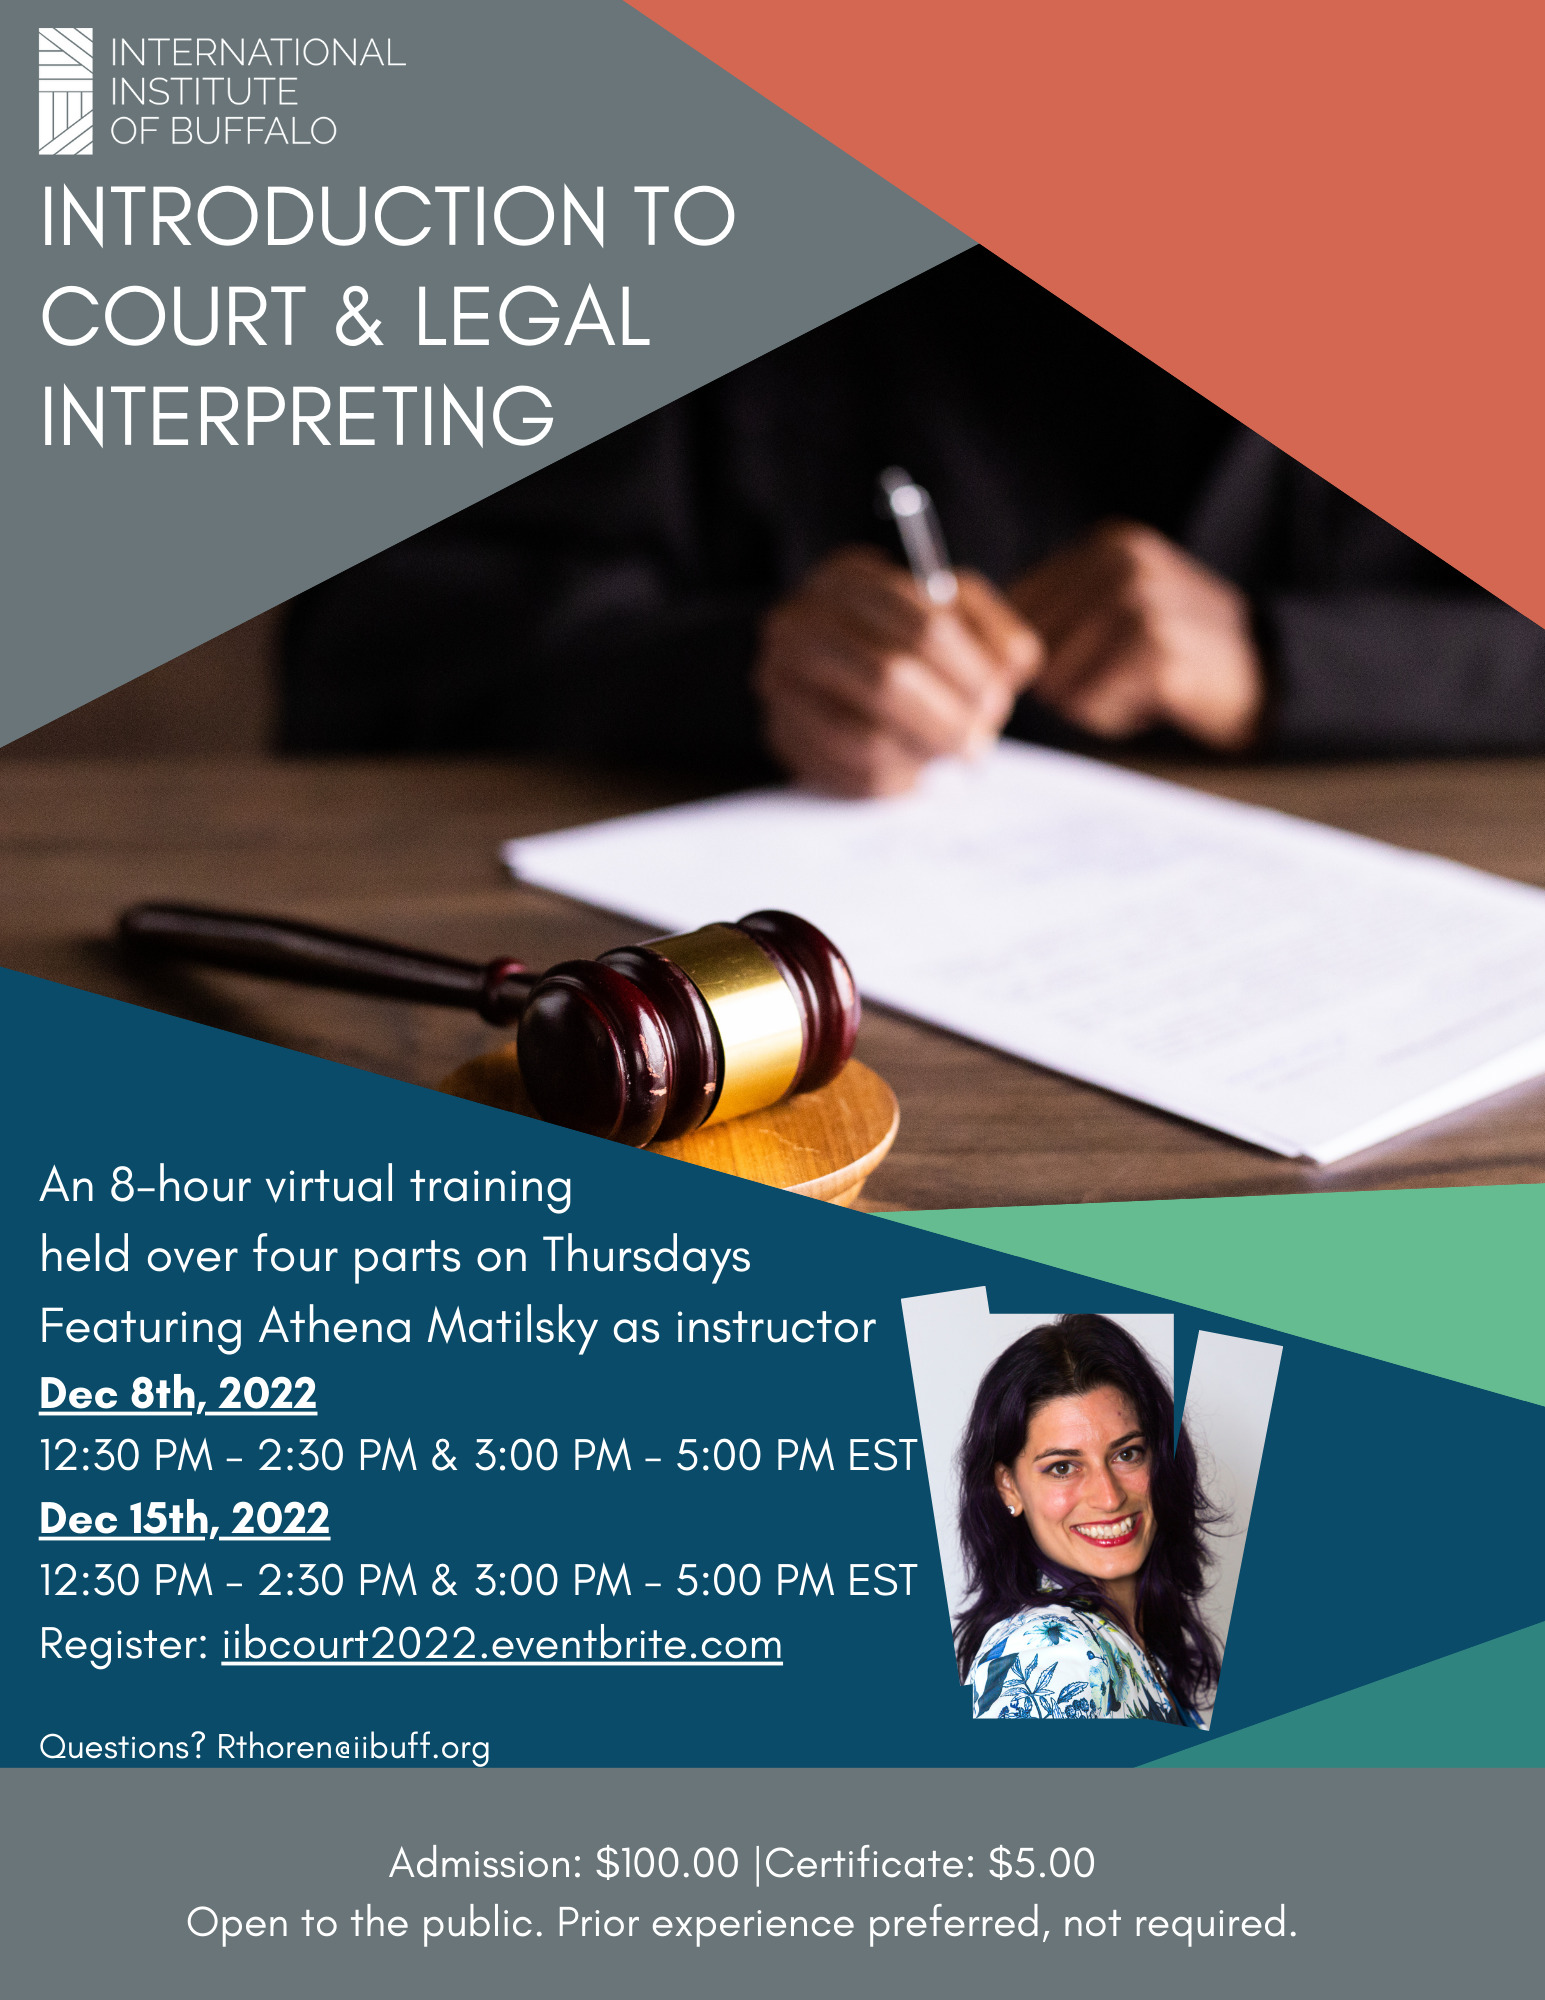 Intro to Court and Legal Interpreting Class. More Infor at iibcourt2022@eventbrite.com